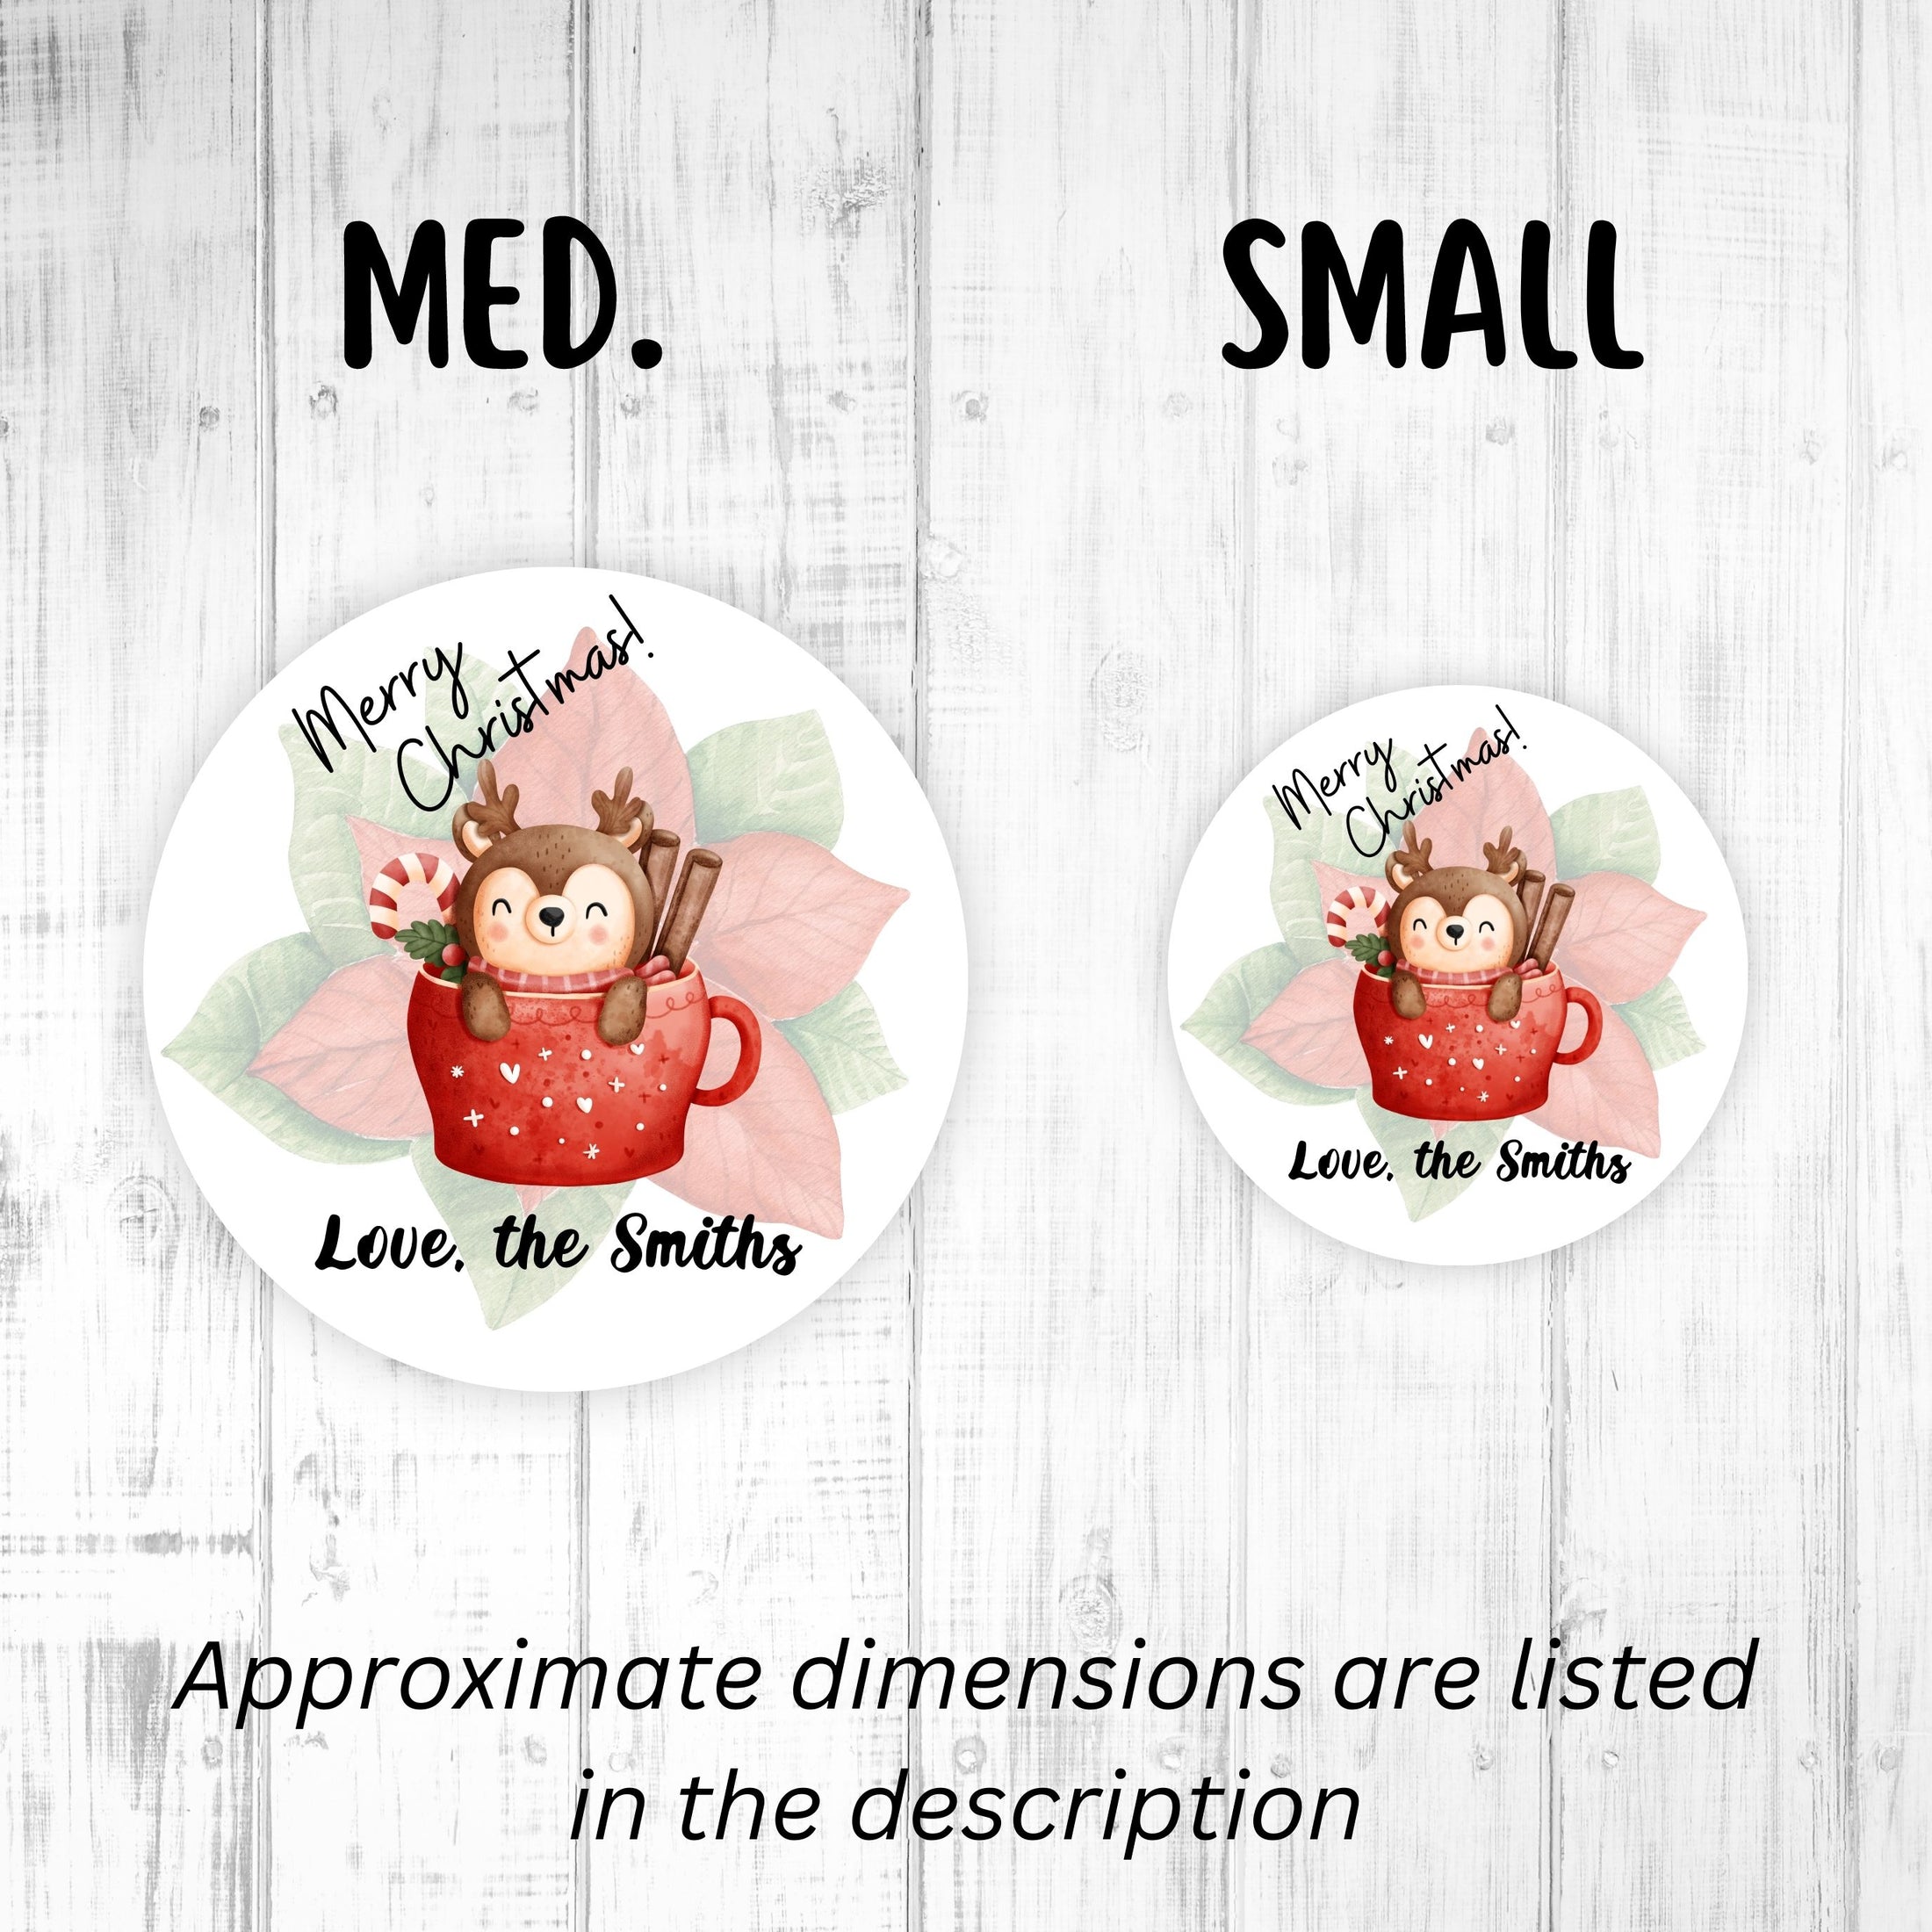 This image shows the medium and small holiday stickers side-by-side for a size comparison, and it says “Approximate dimensions are listed in the description.